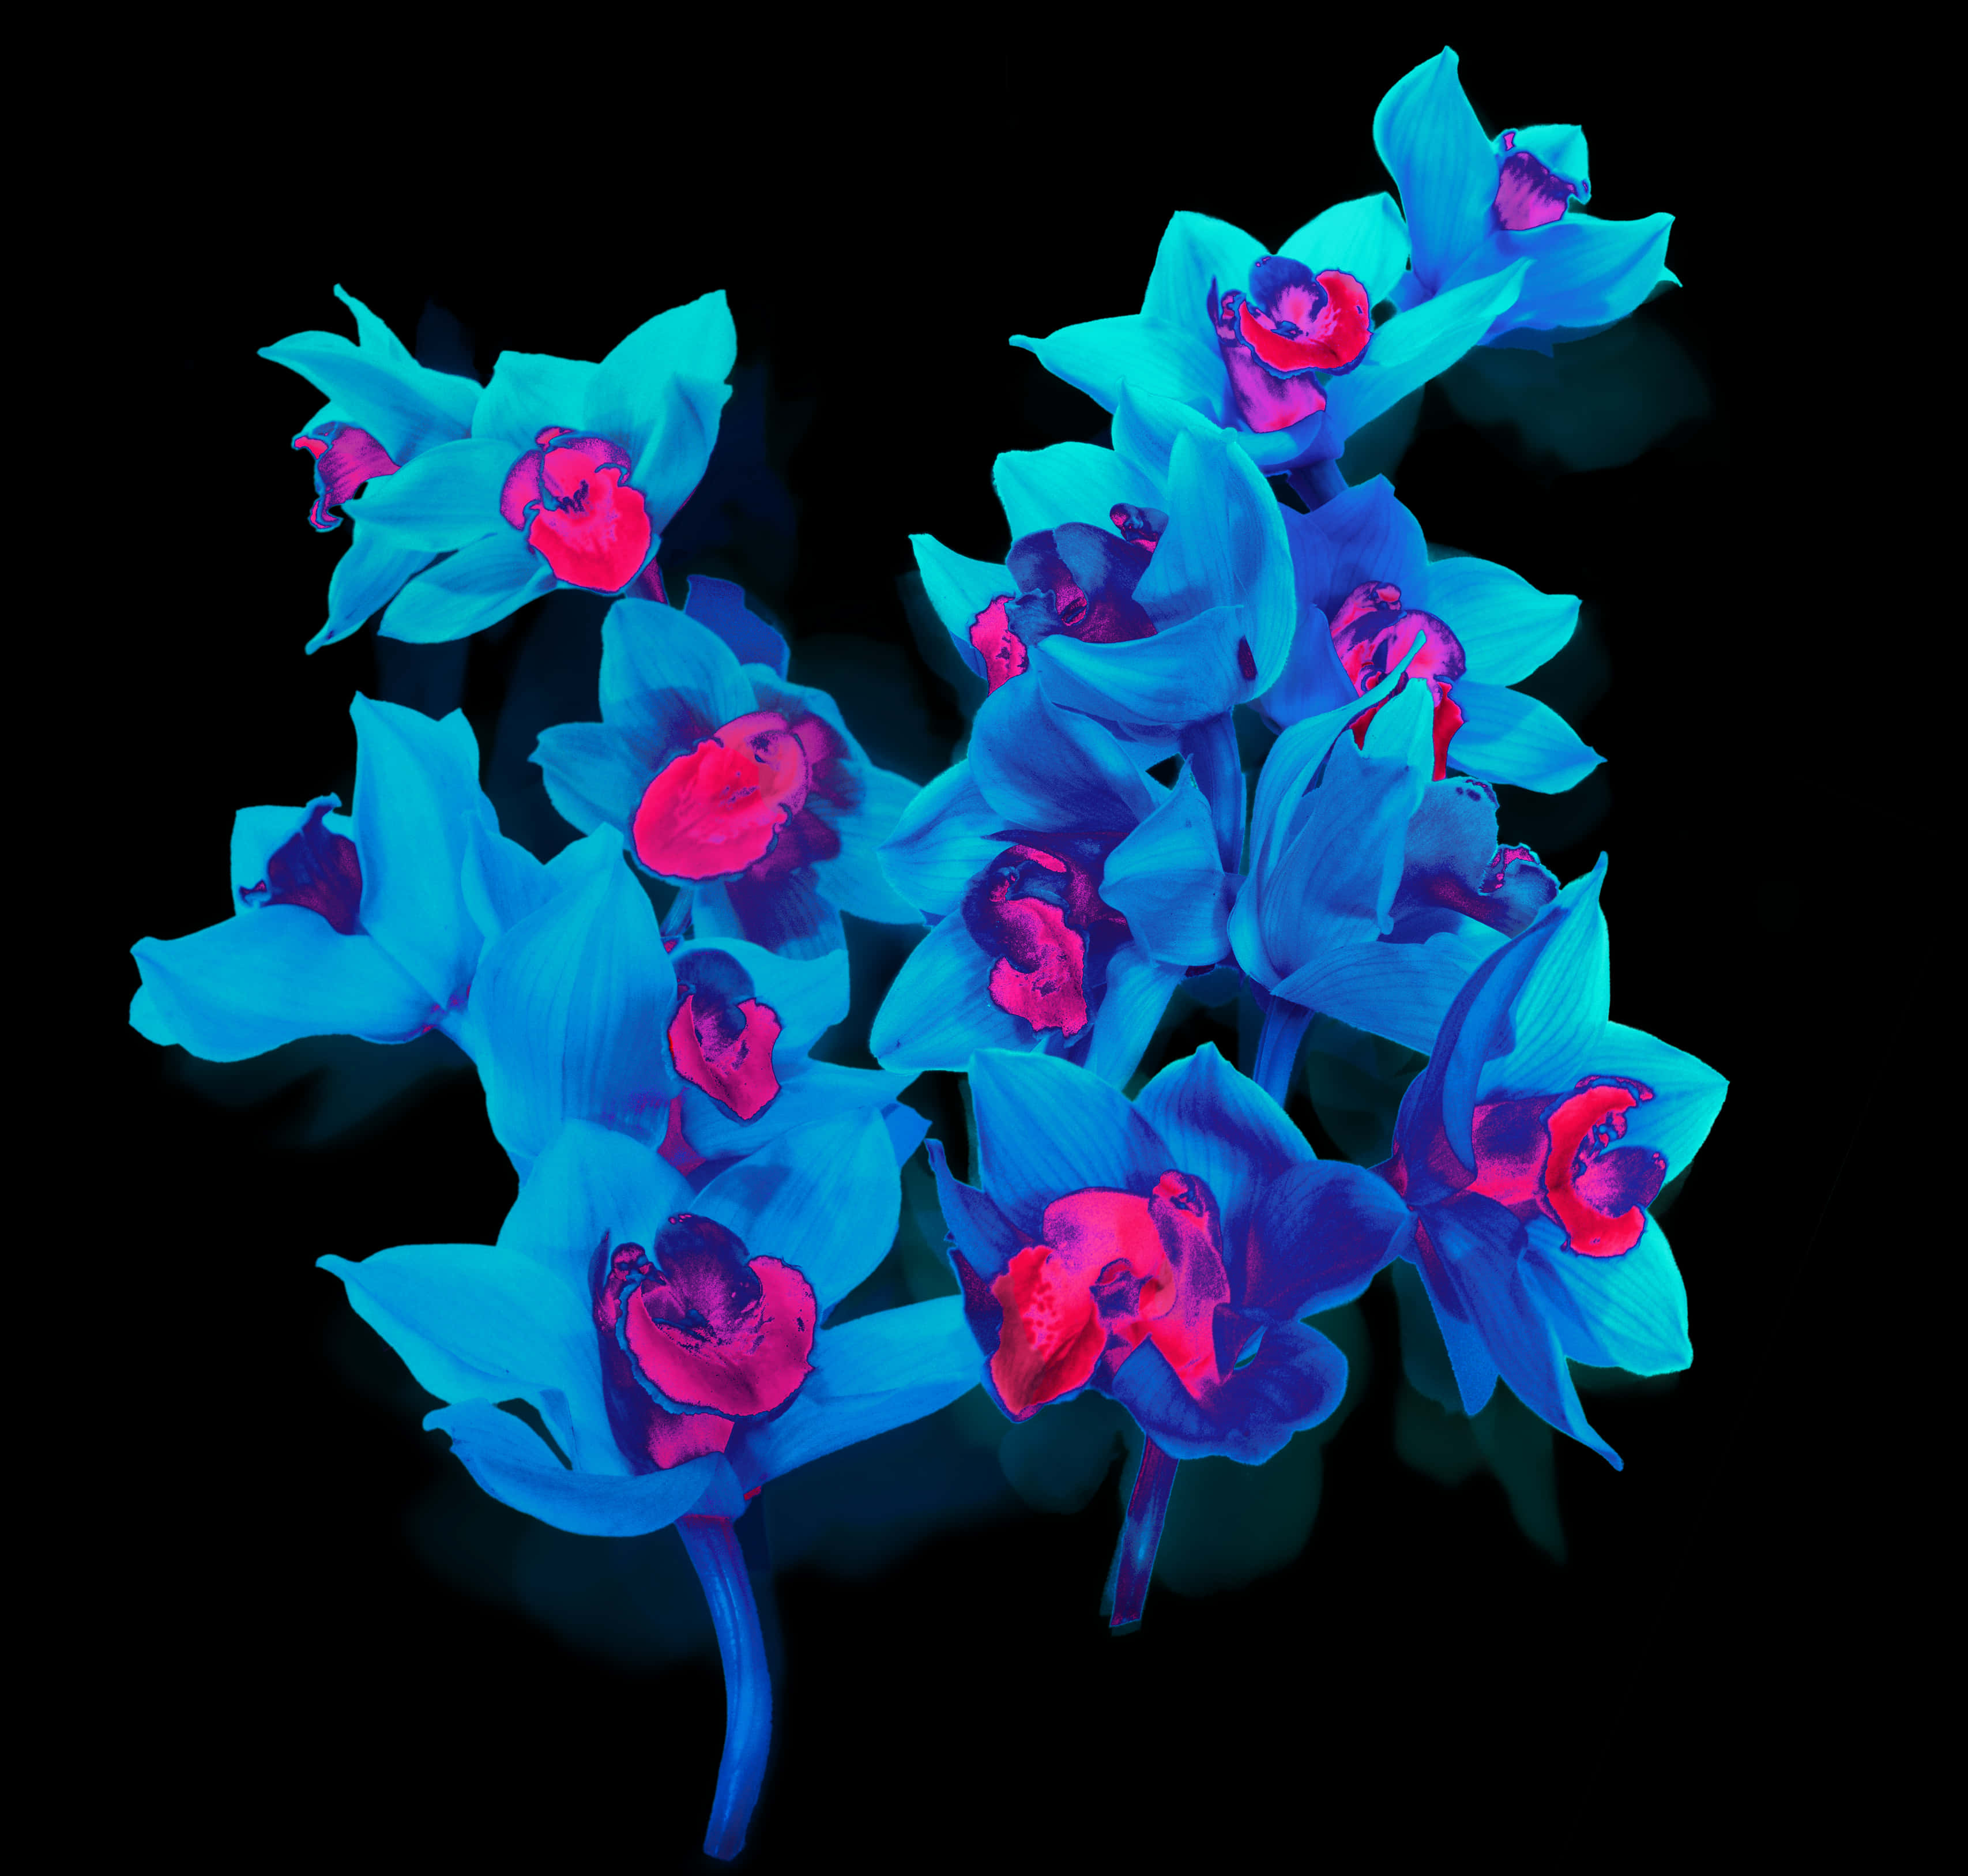 A Group Of Blue And Pink Flowers